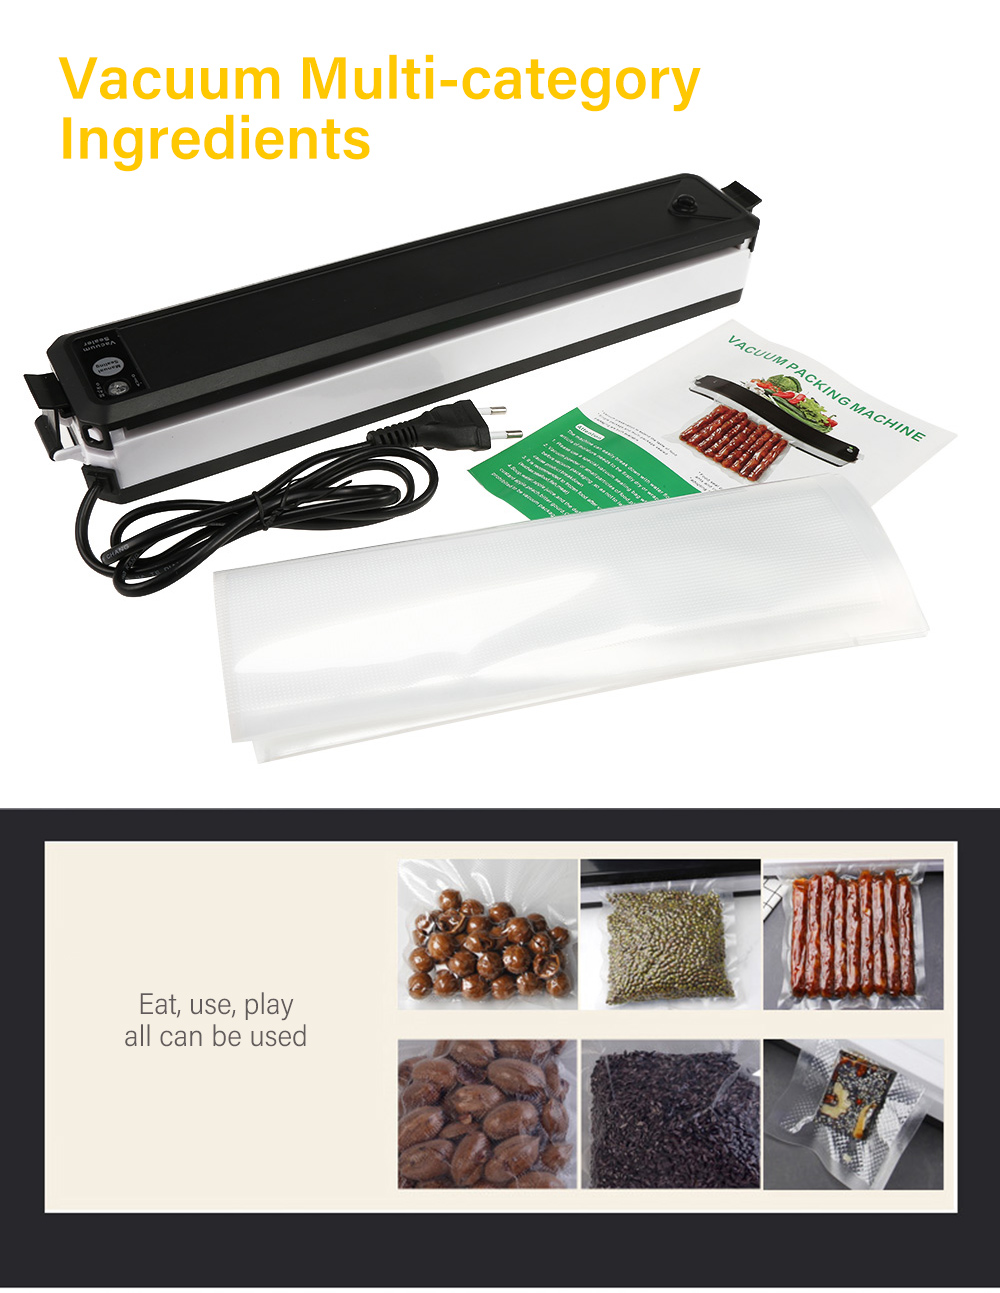 ZK 100 Fully Automatic Household One-button Vacuum Packing Machine